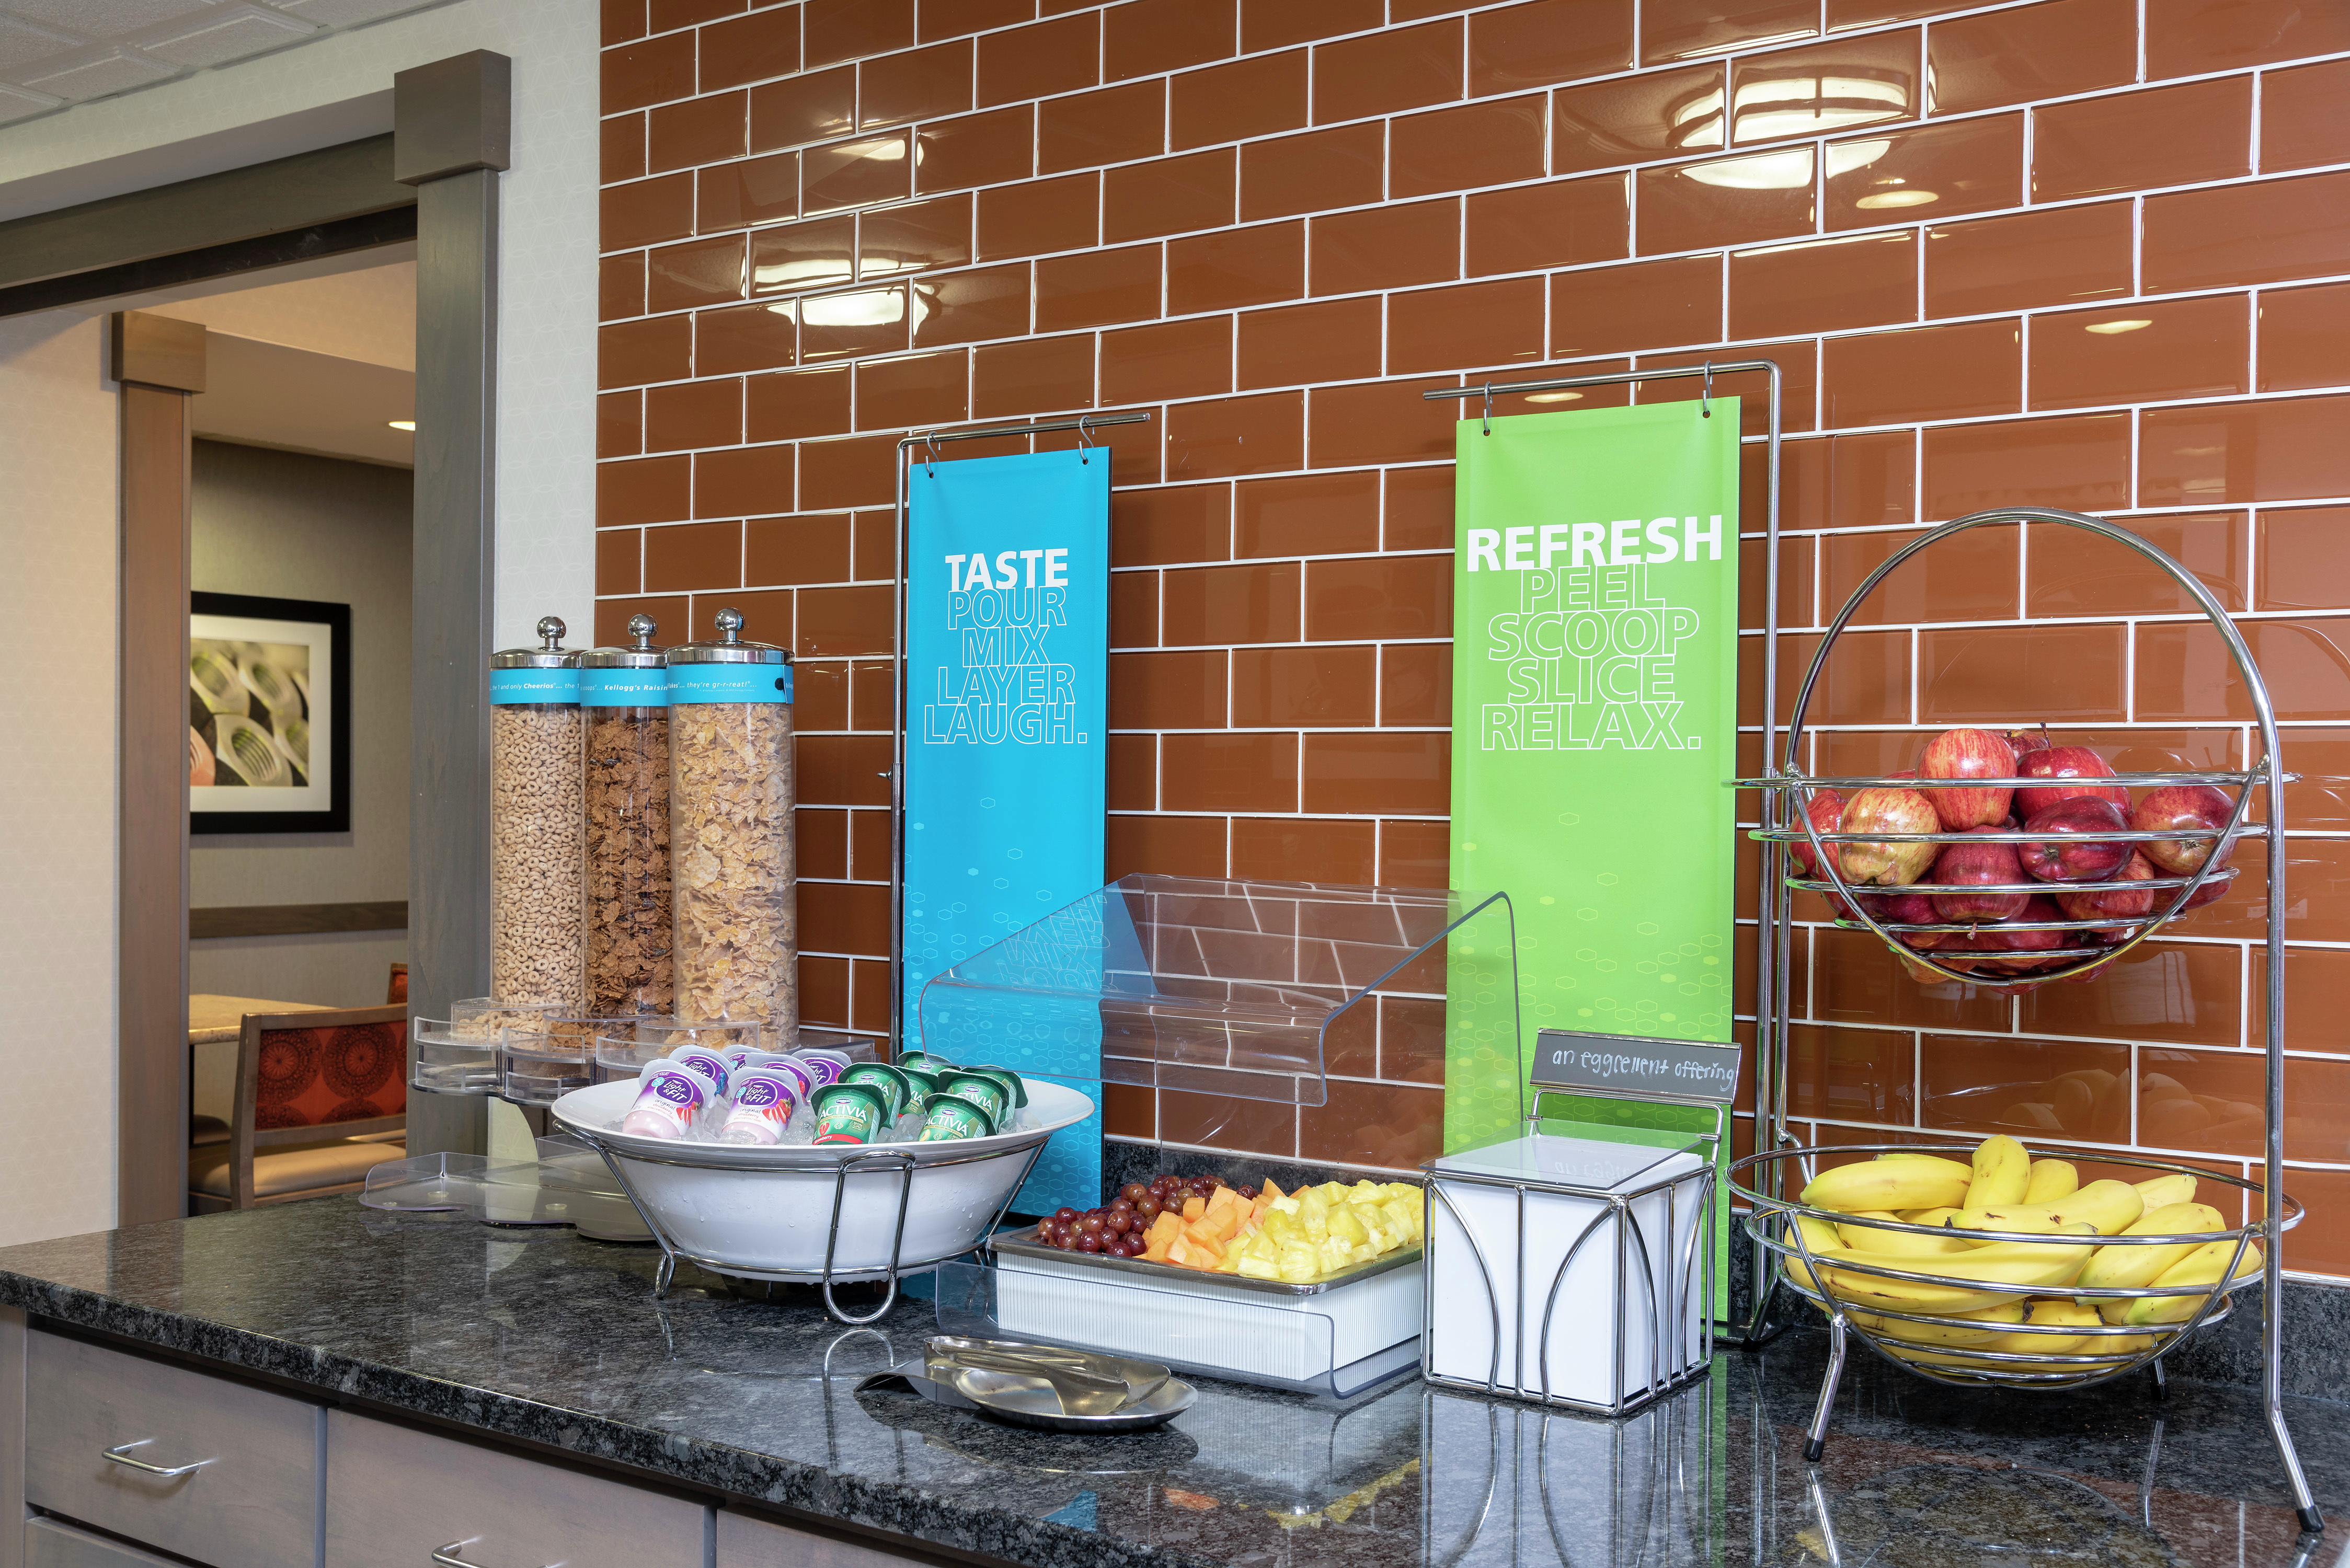 Breakfast Area with Cereals and Fresh Fruits